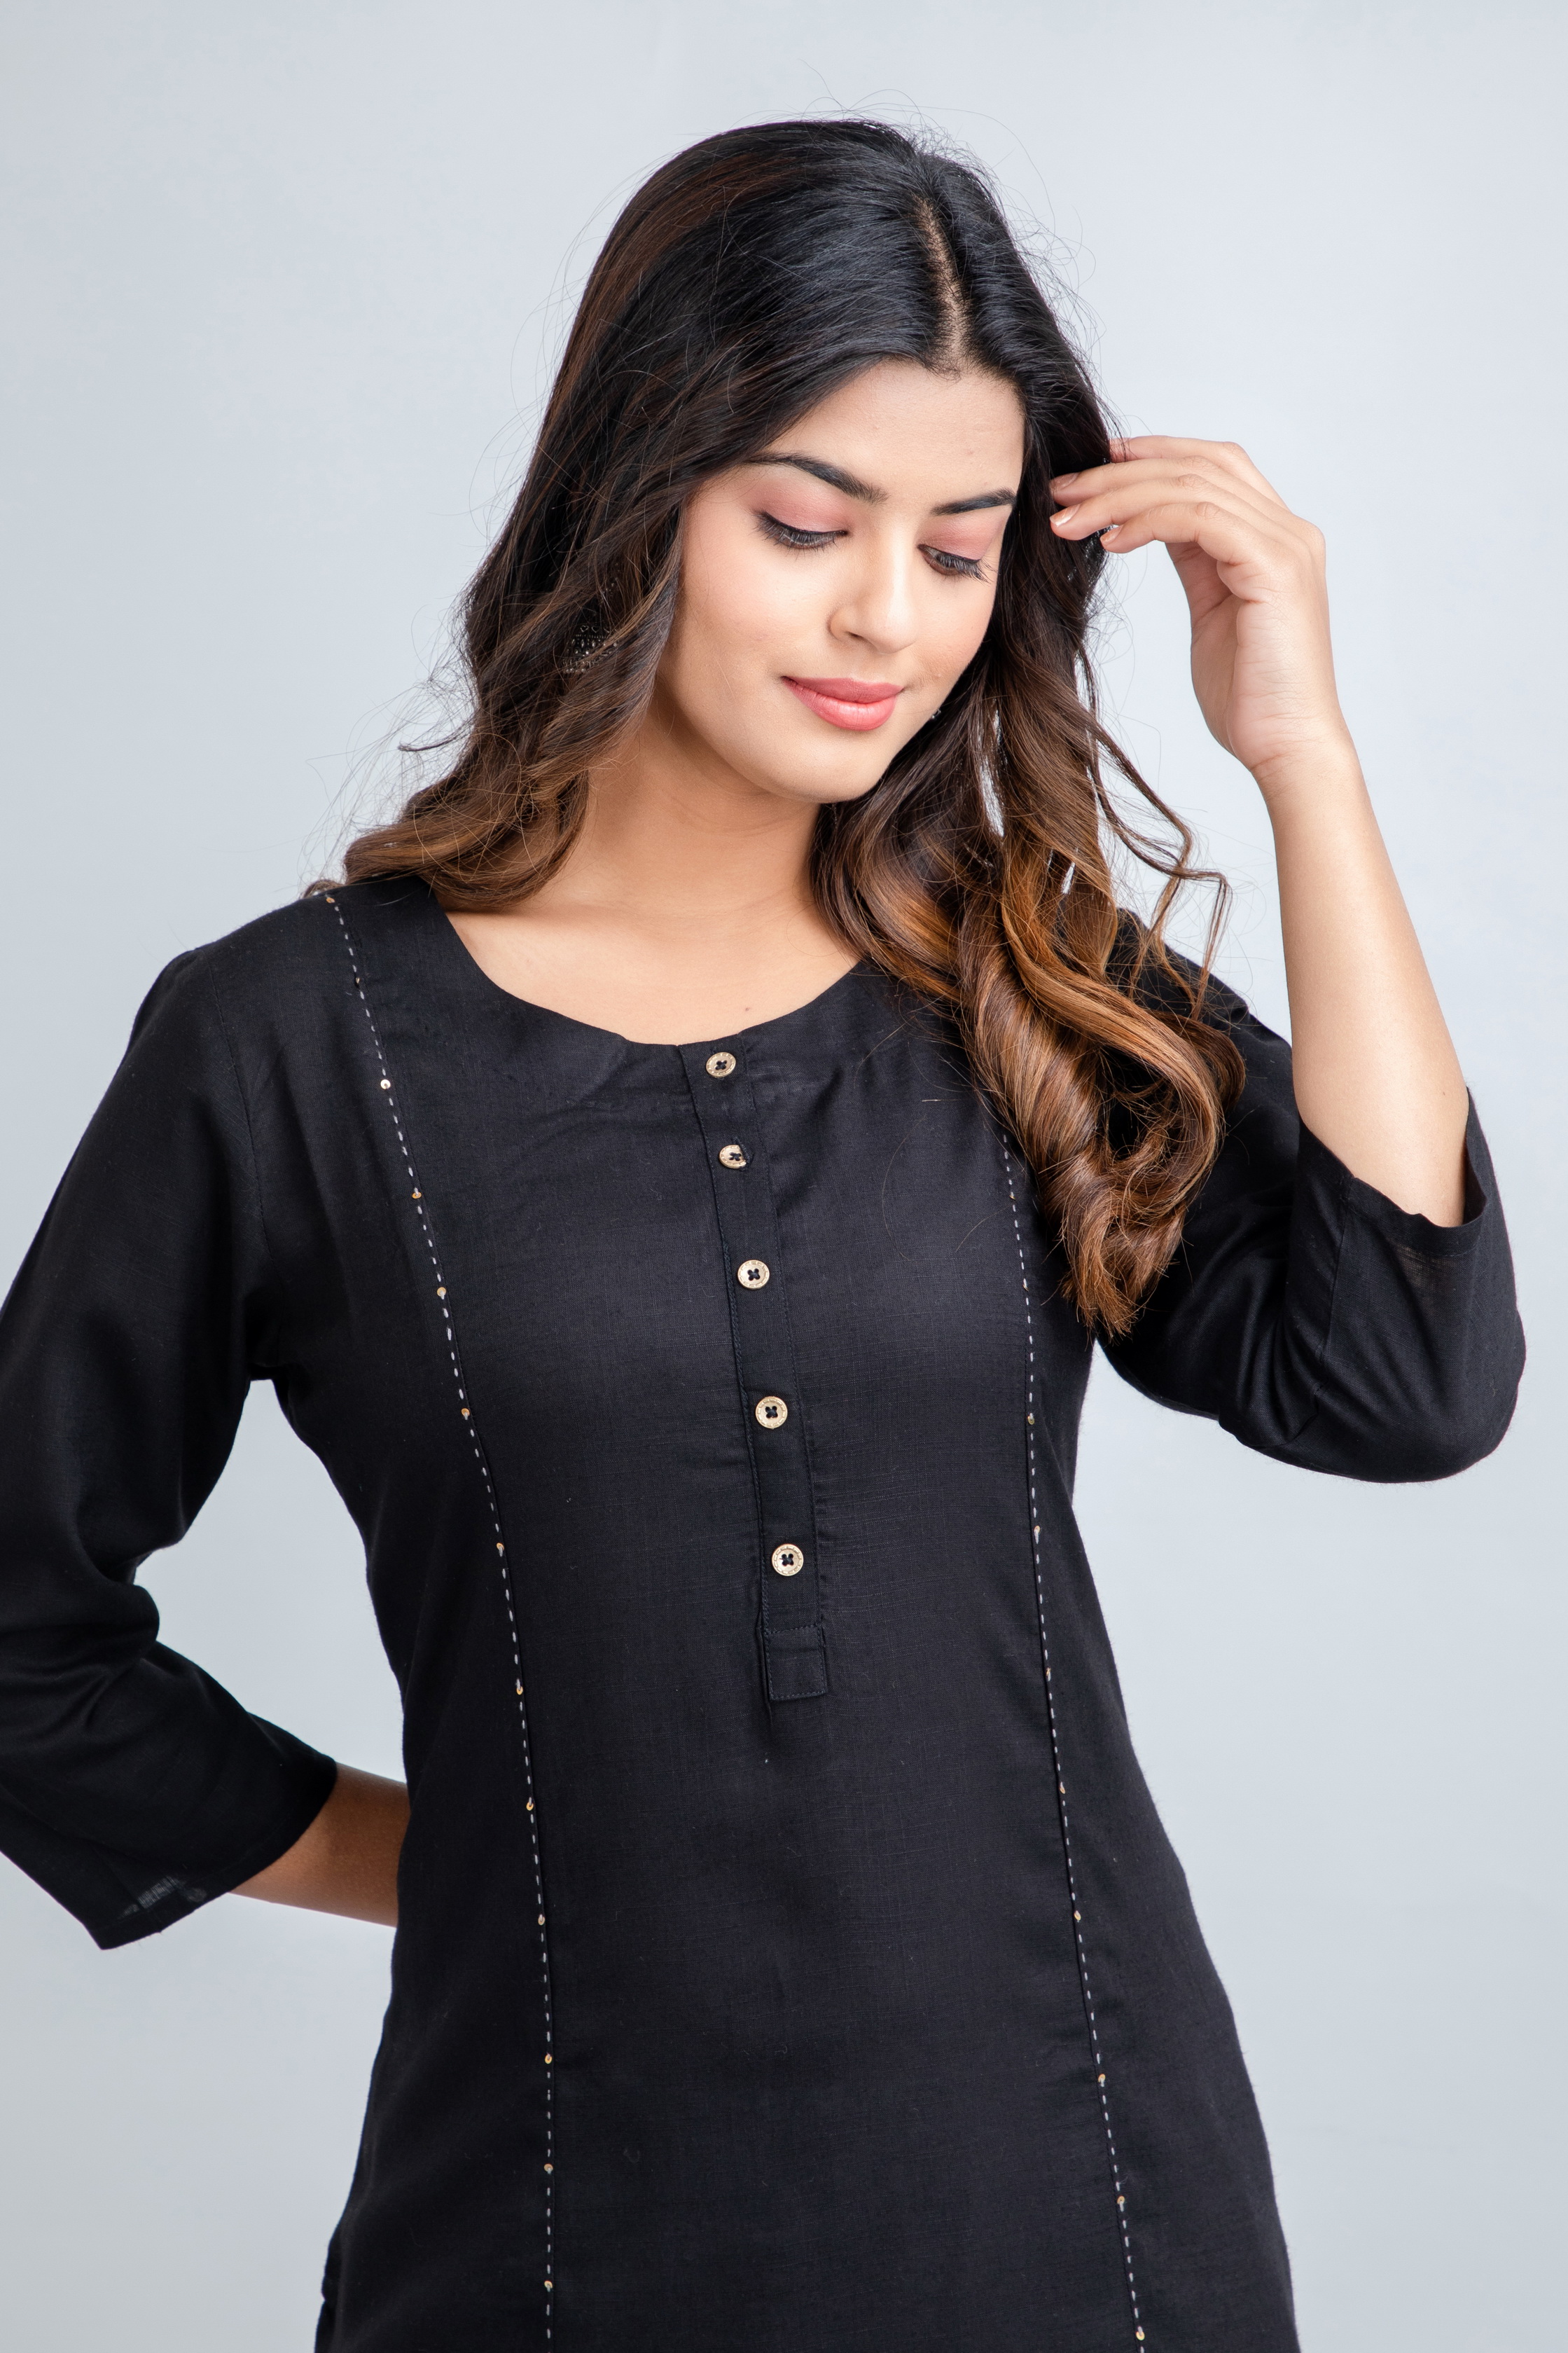 Ayaany Women's Cotton Half Sleeve Prince Cut Slim Fit Plain Solid Short  Kurti ( Black , Small ) : Amazon.in: Clothing & Accessories